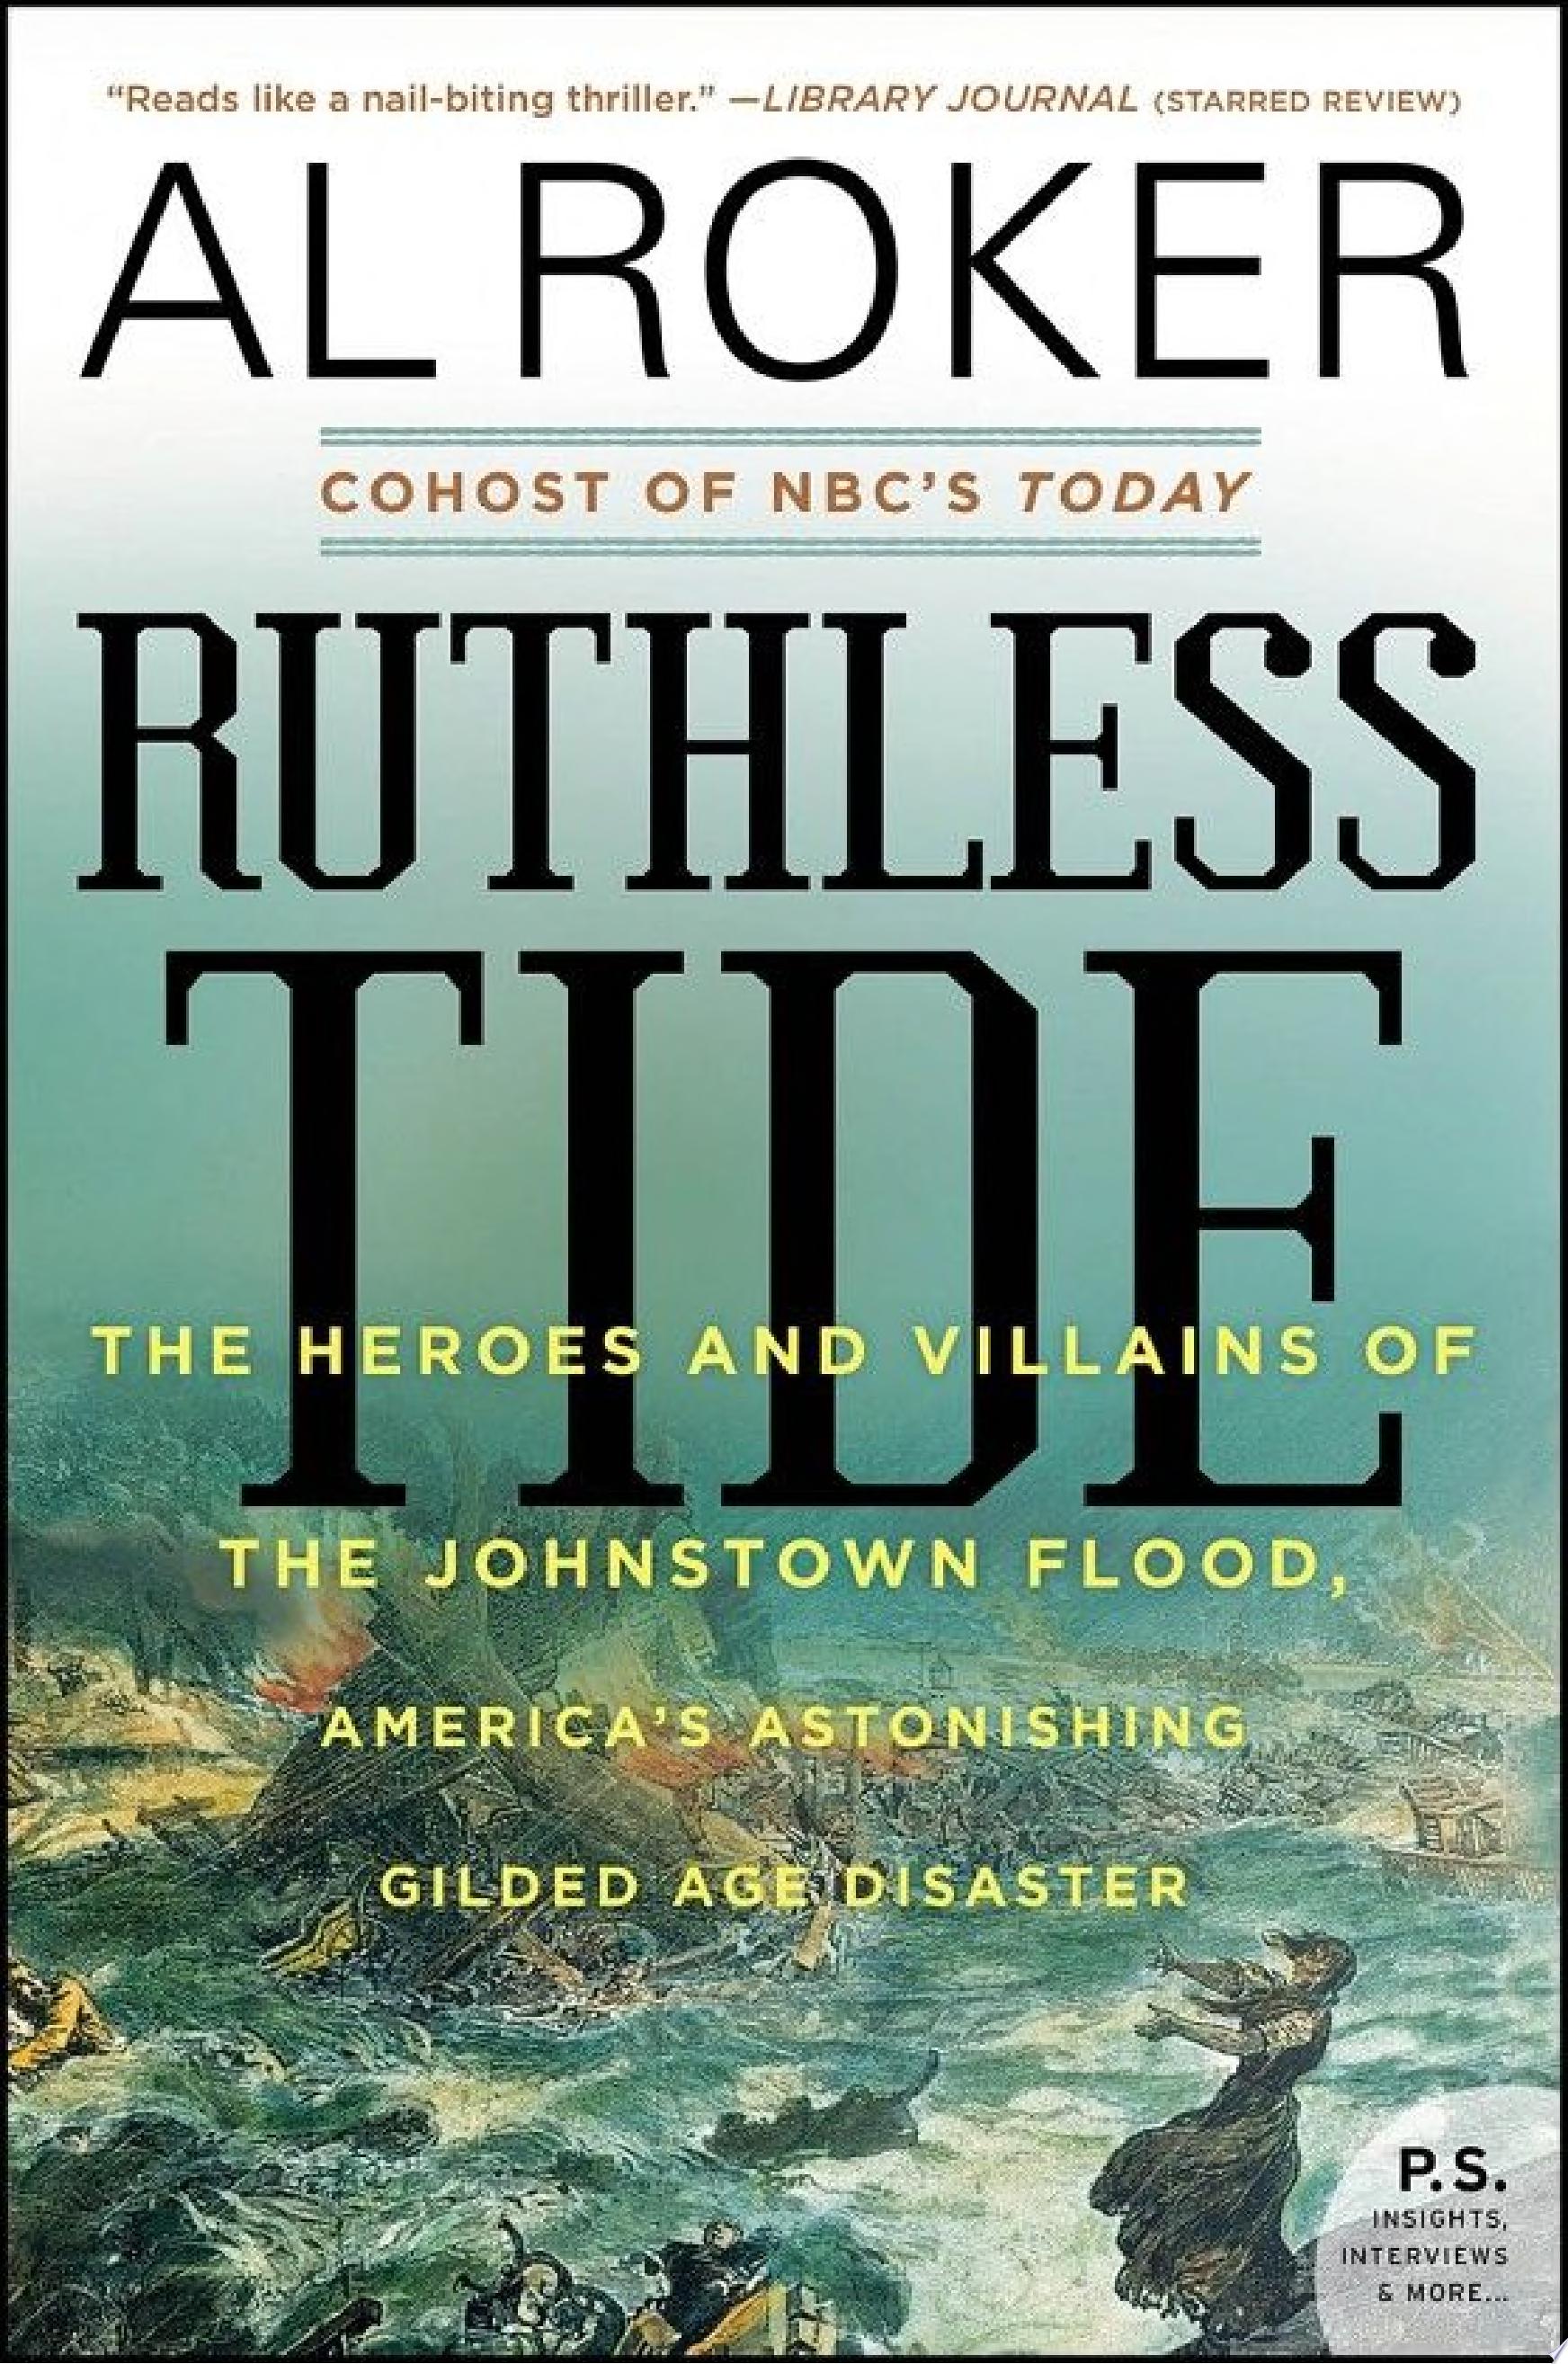 Image for "Ruthless Tide"